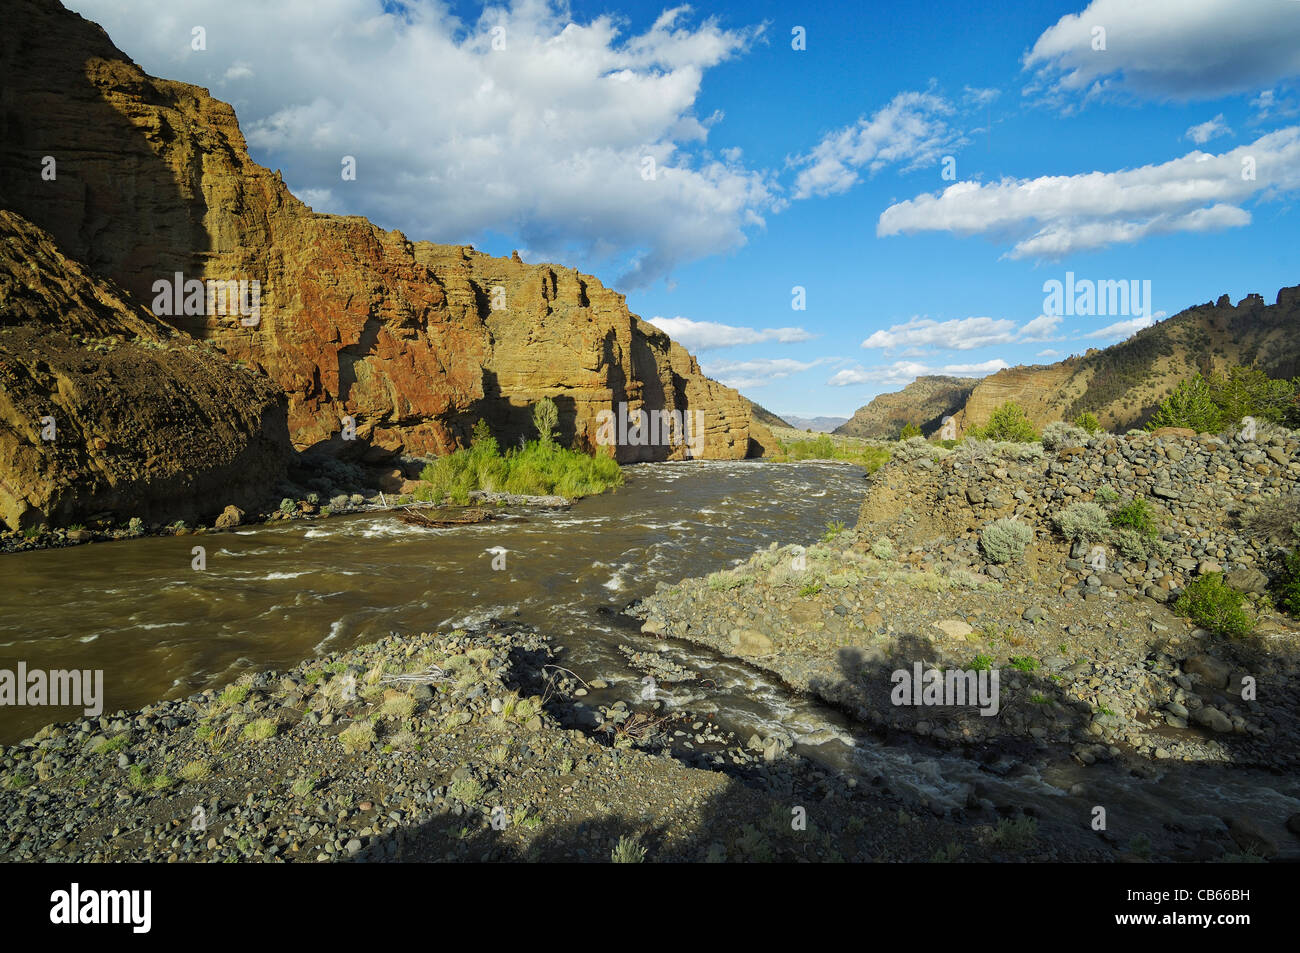 Shoshone River on a Sunny Day Stock Photo